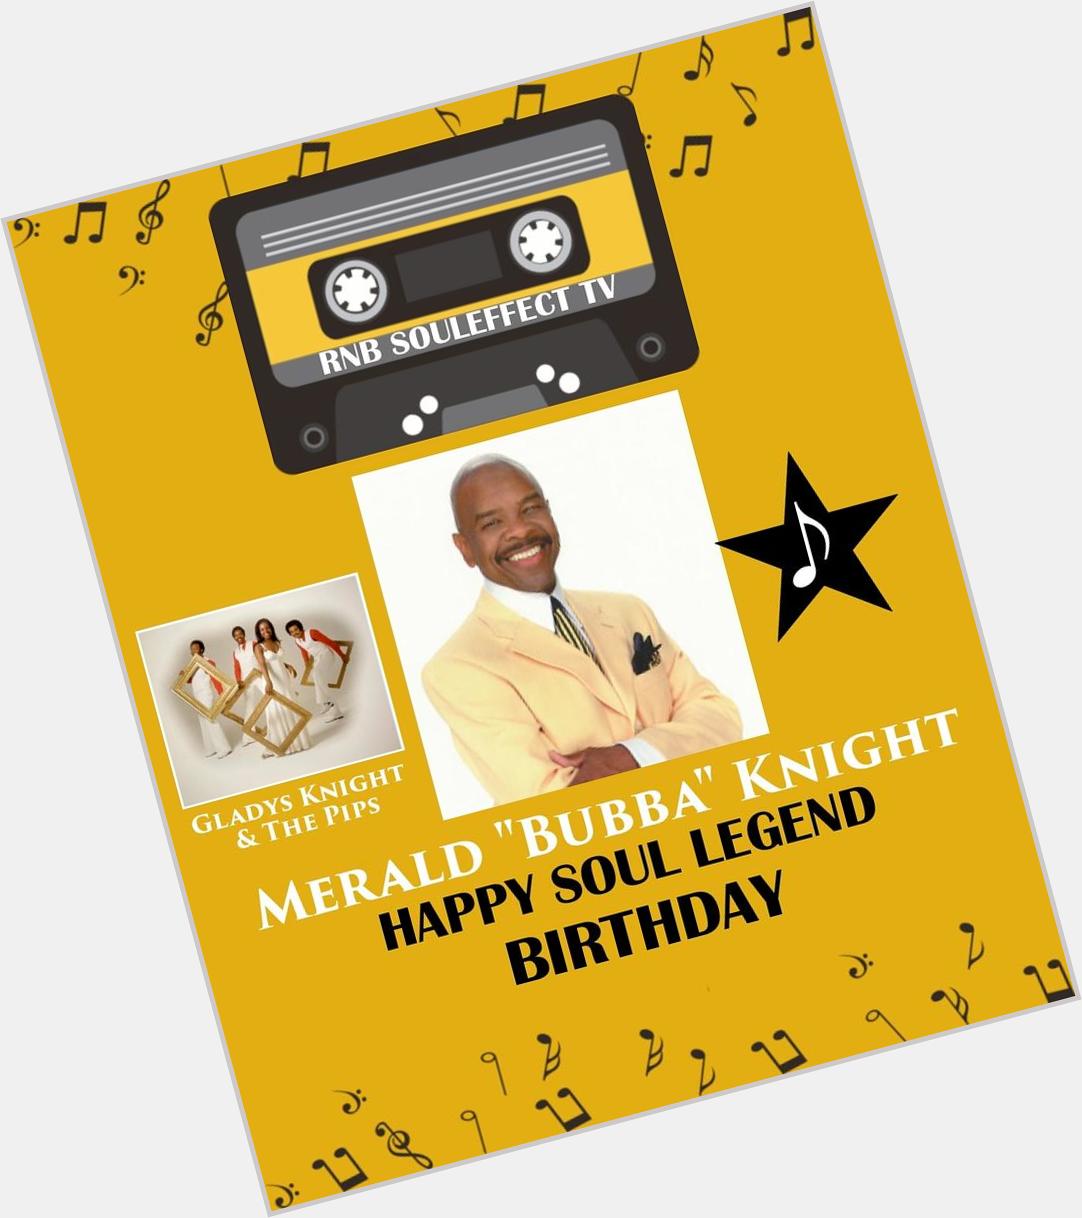 Happy Soul Legend Birthday Merald \"Bubba\" Knight 1/4 member of legendary group \"Gladys Knight & The Pips\" 